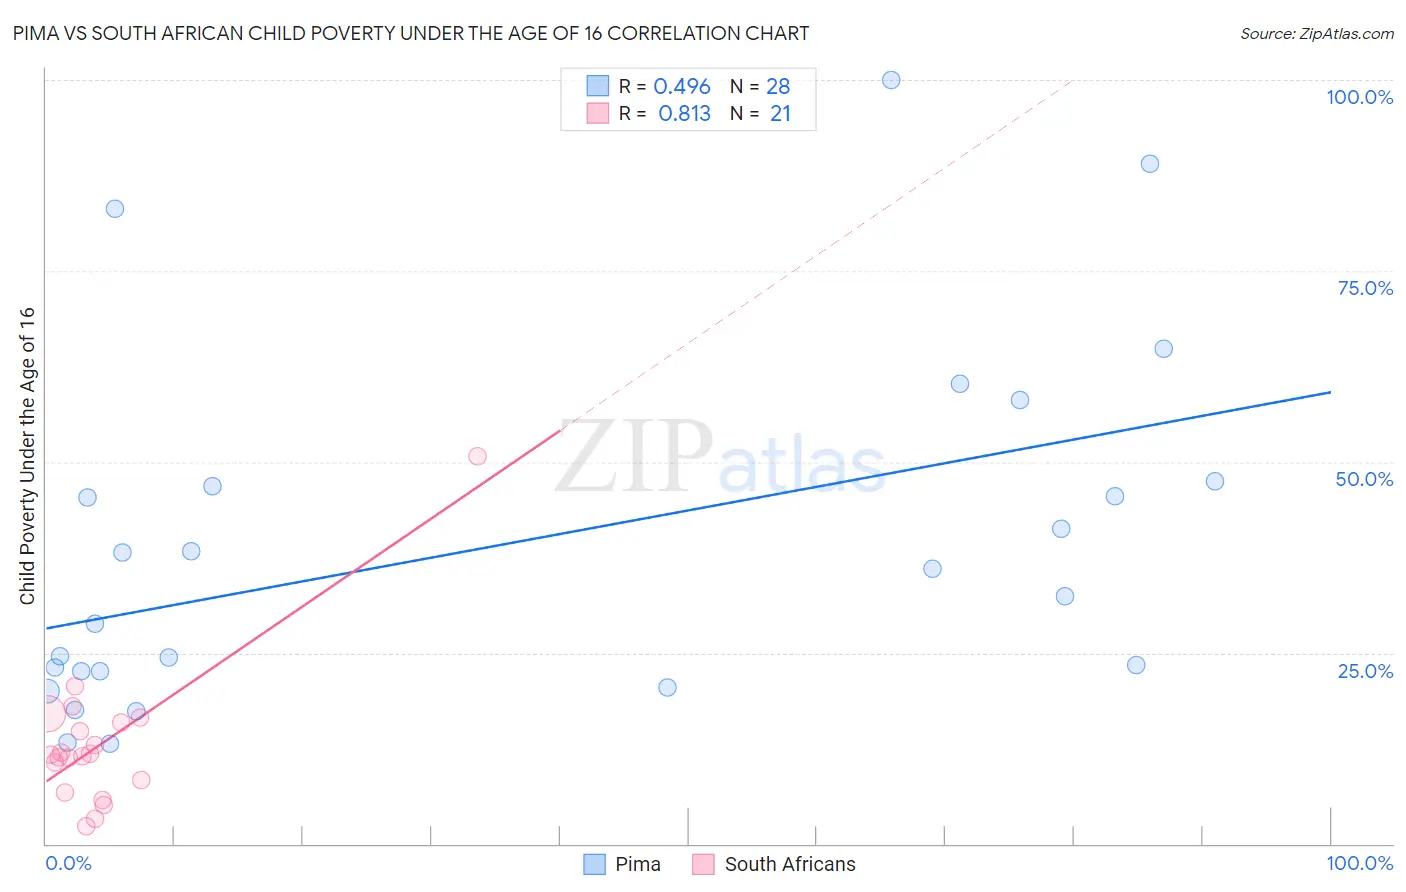 Pima vs South African Child Poverty Under the Age of 16